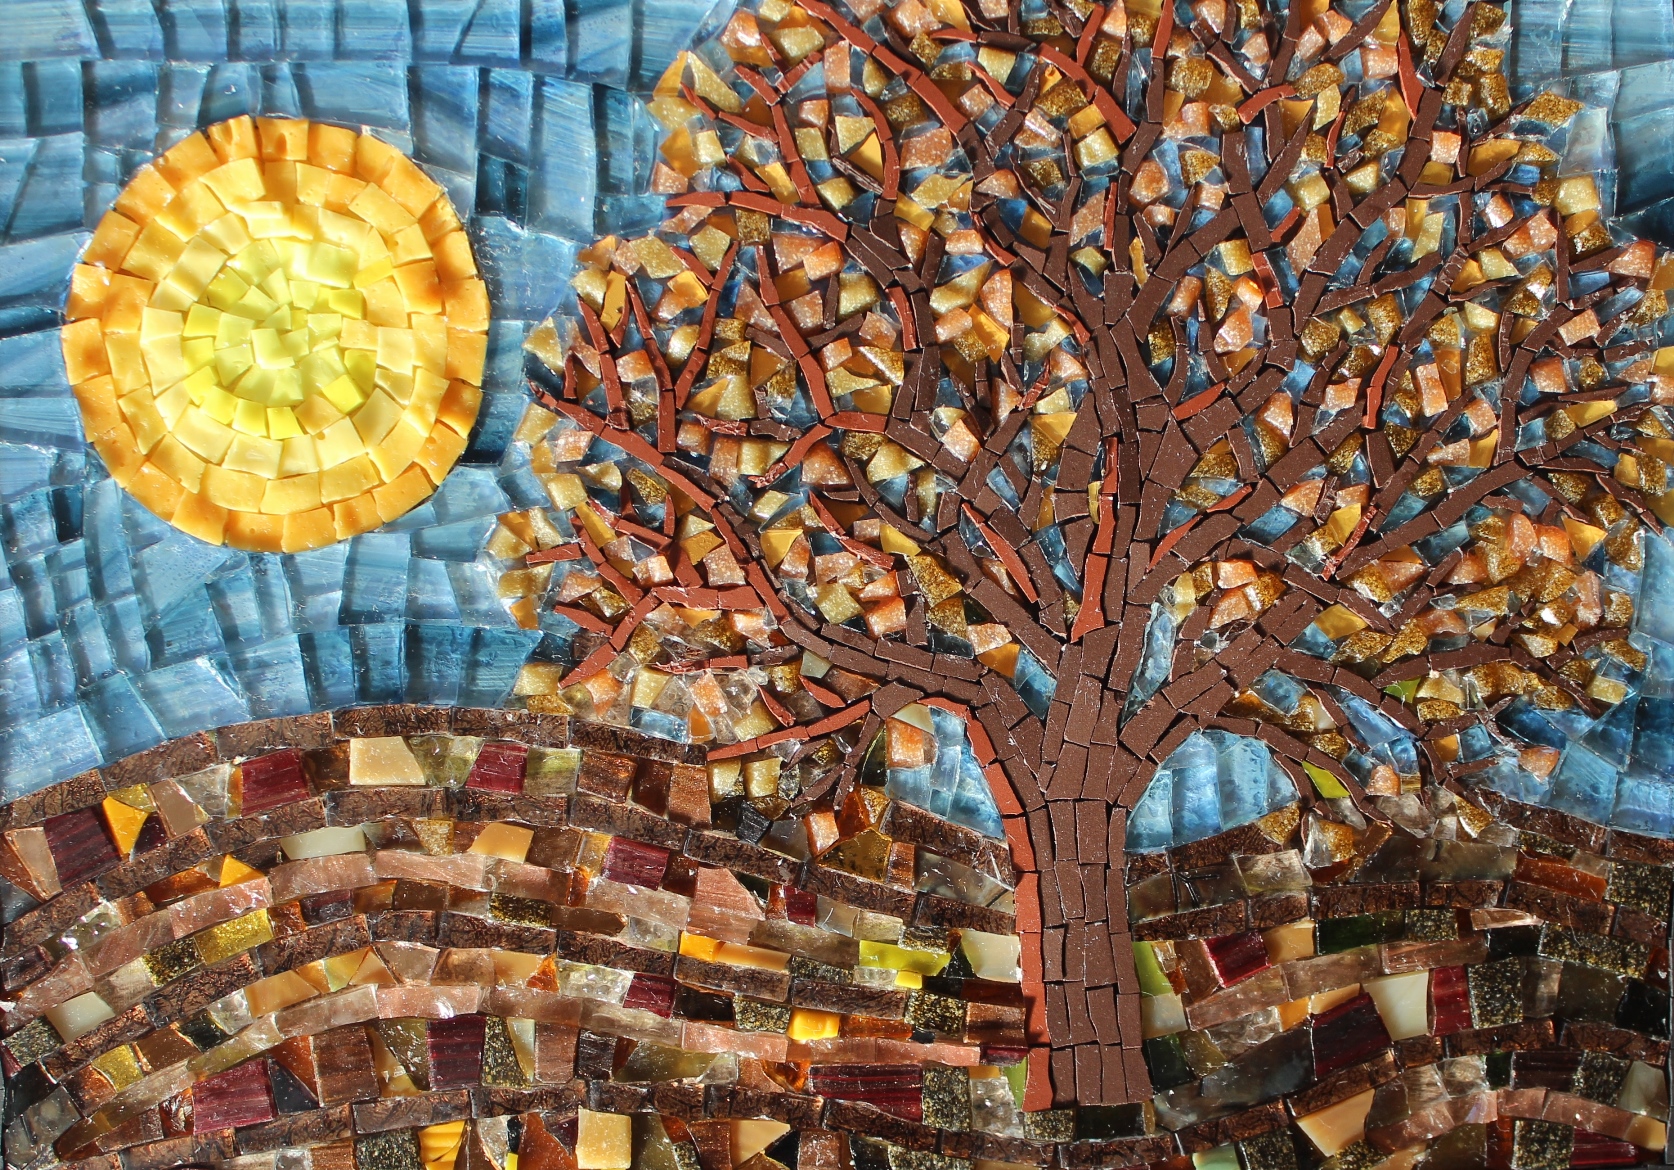 Sue Kershaw, Mosaic Artist | mosaic art, commissions and workshops ...